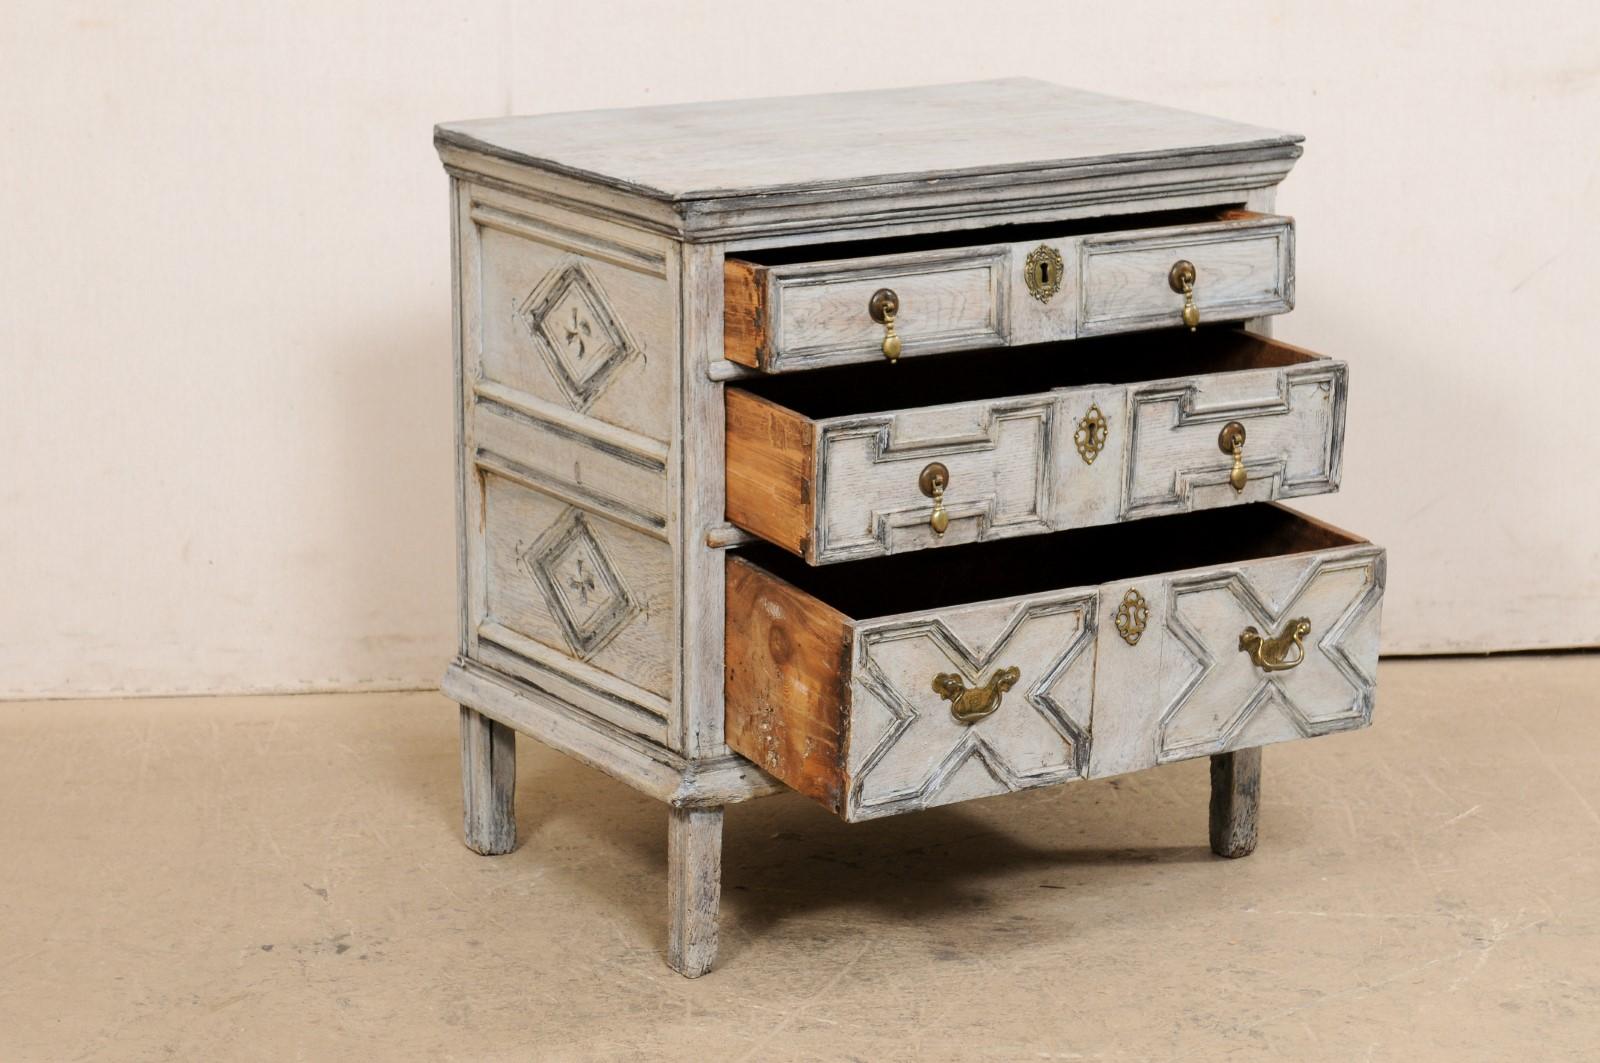 19th C. English Smaller-Sized Chest Adorn in Geometrically Carved Panels  2